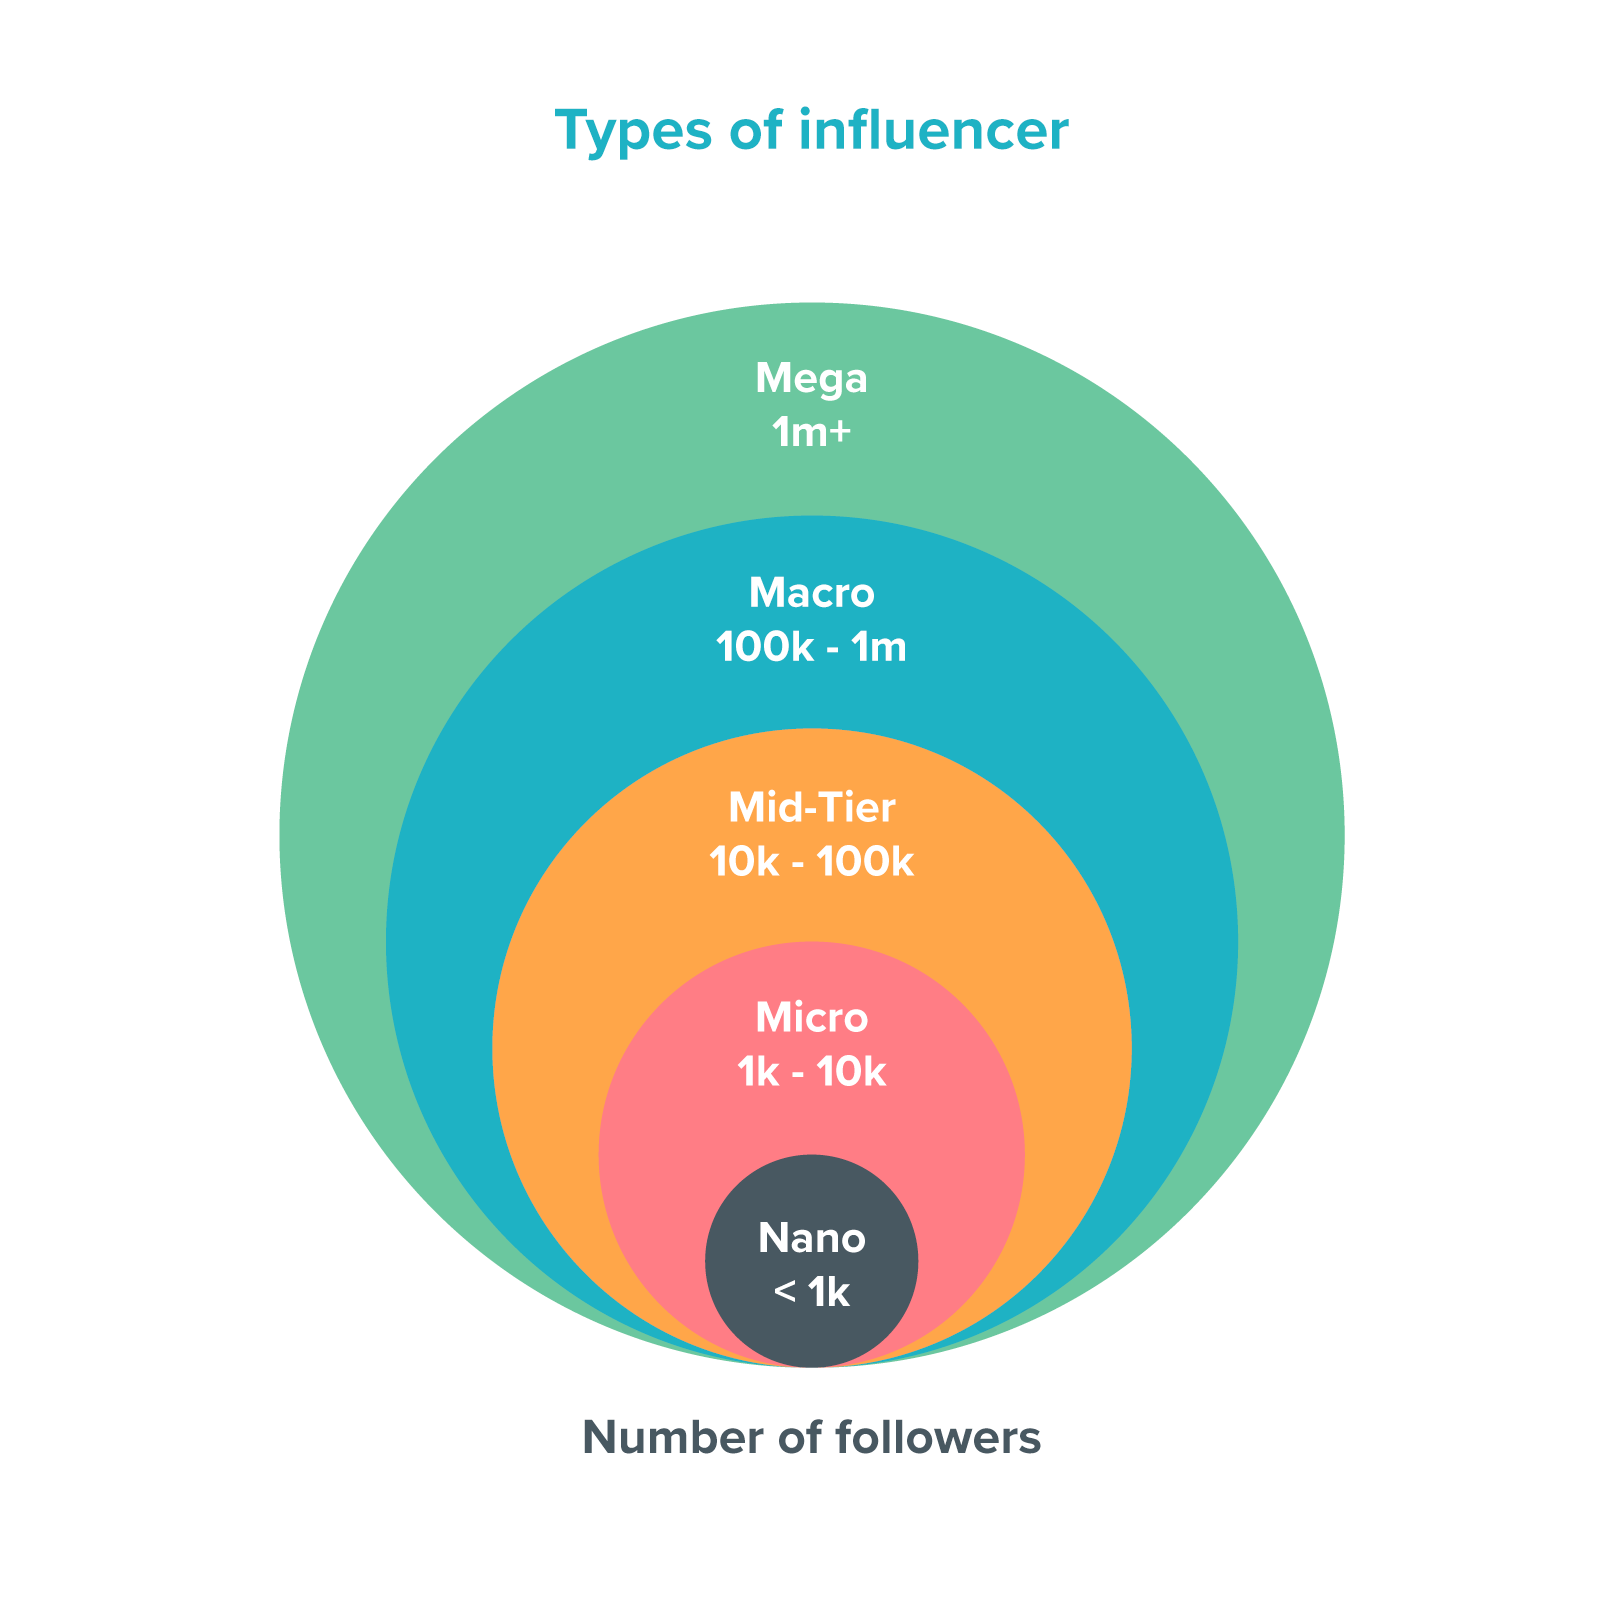 Types of influencers audience segments